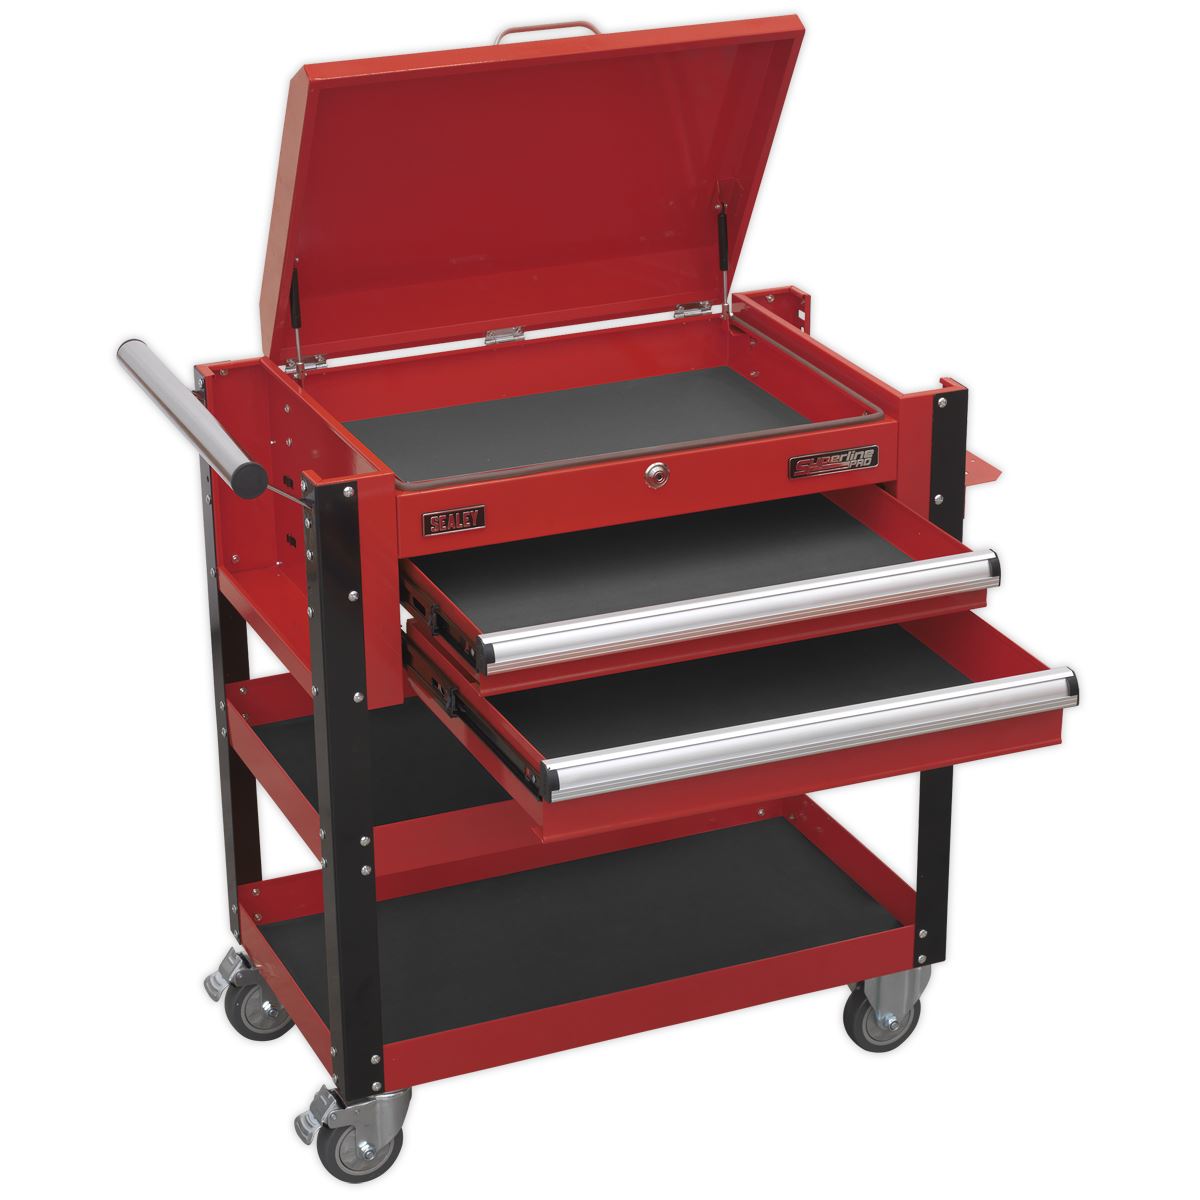 Sealey Superline Pro Heavy-Duty Mobile Tool & Parts Trolley 2 Drawers & Lockable Top - Red